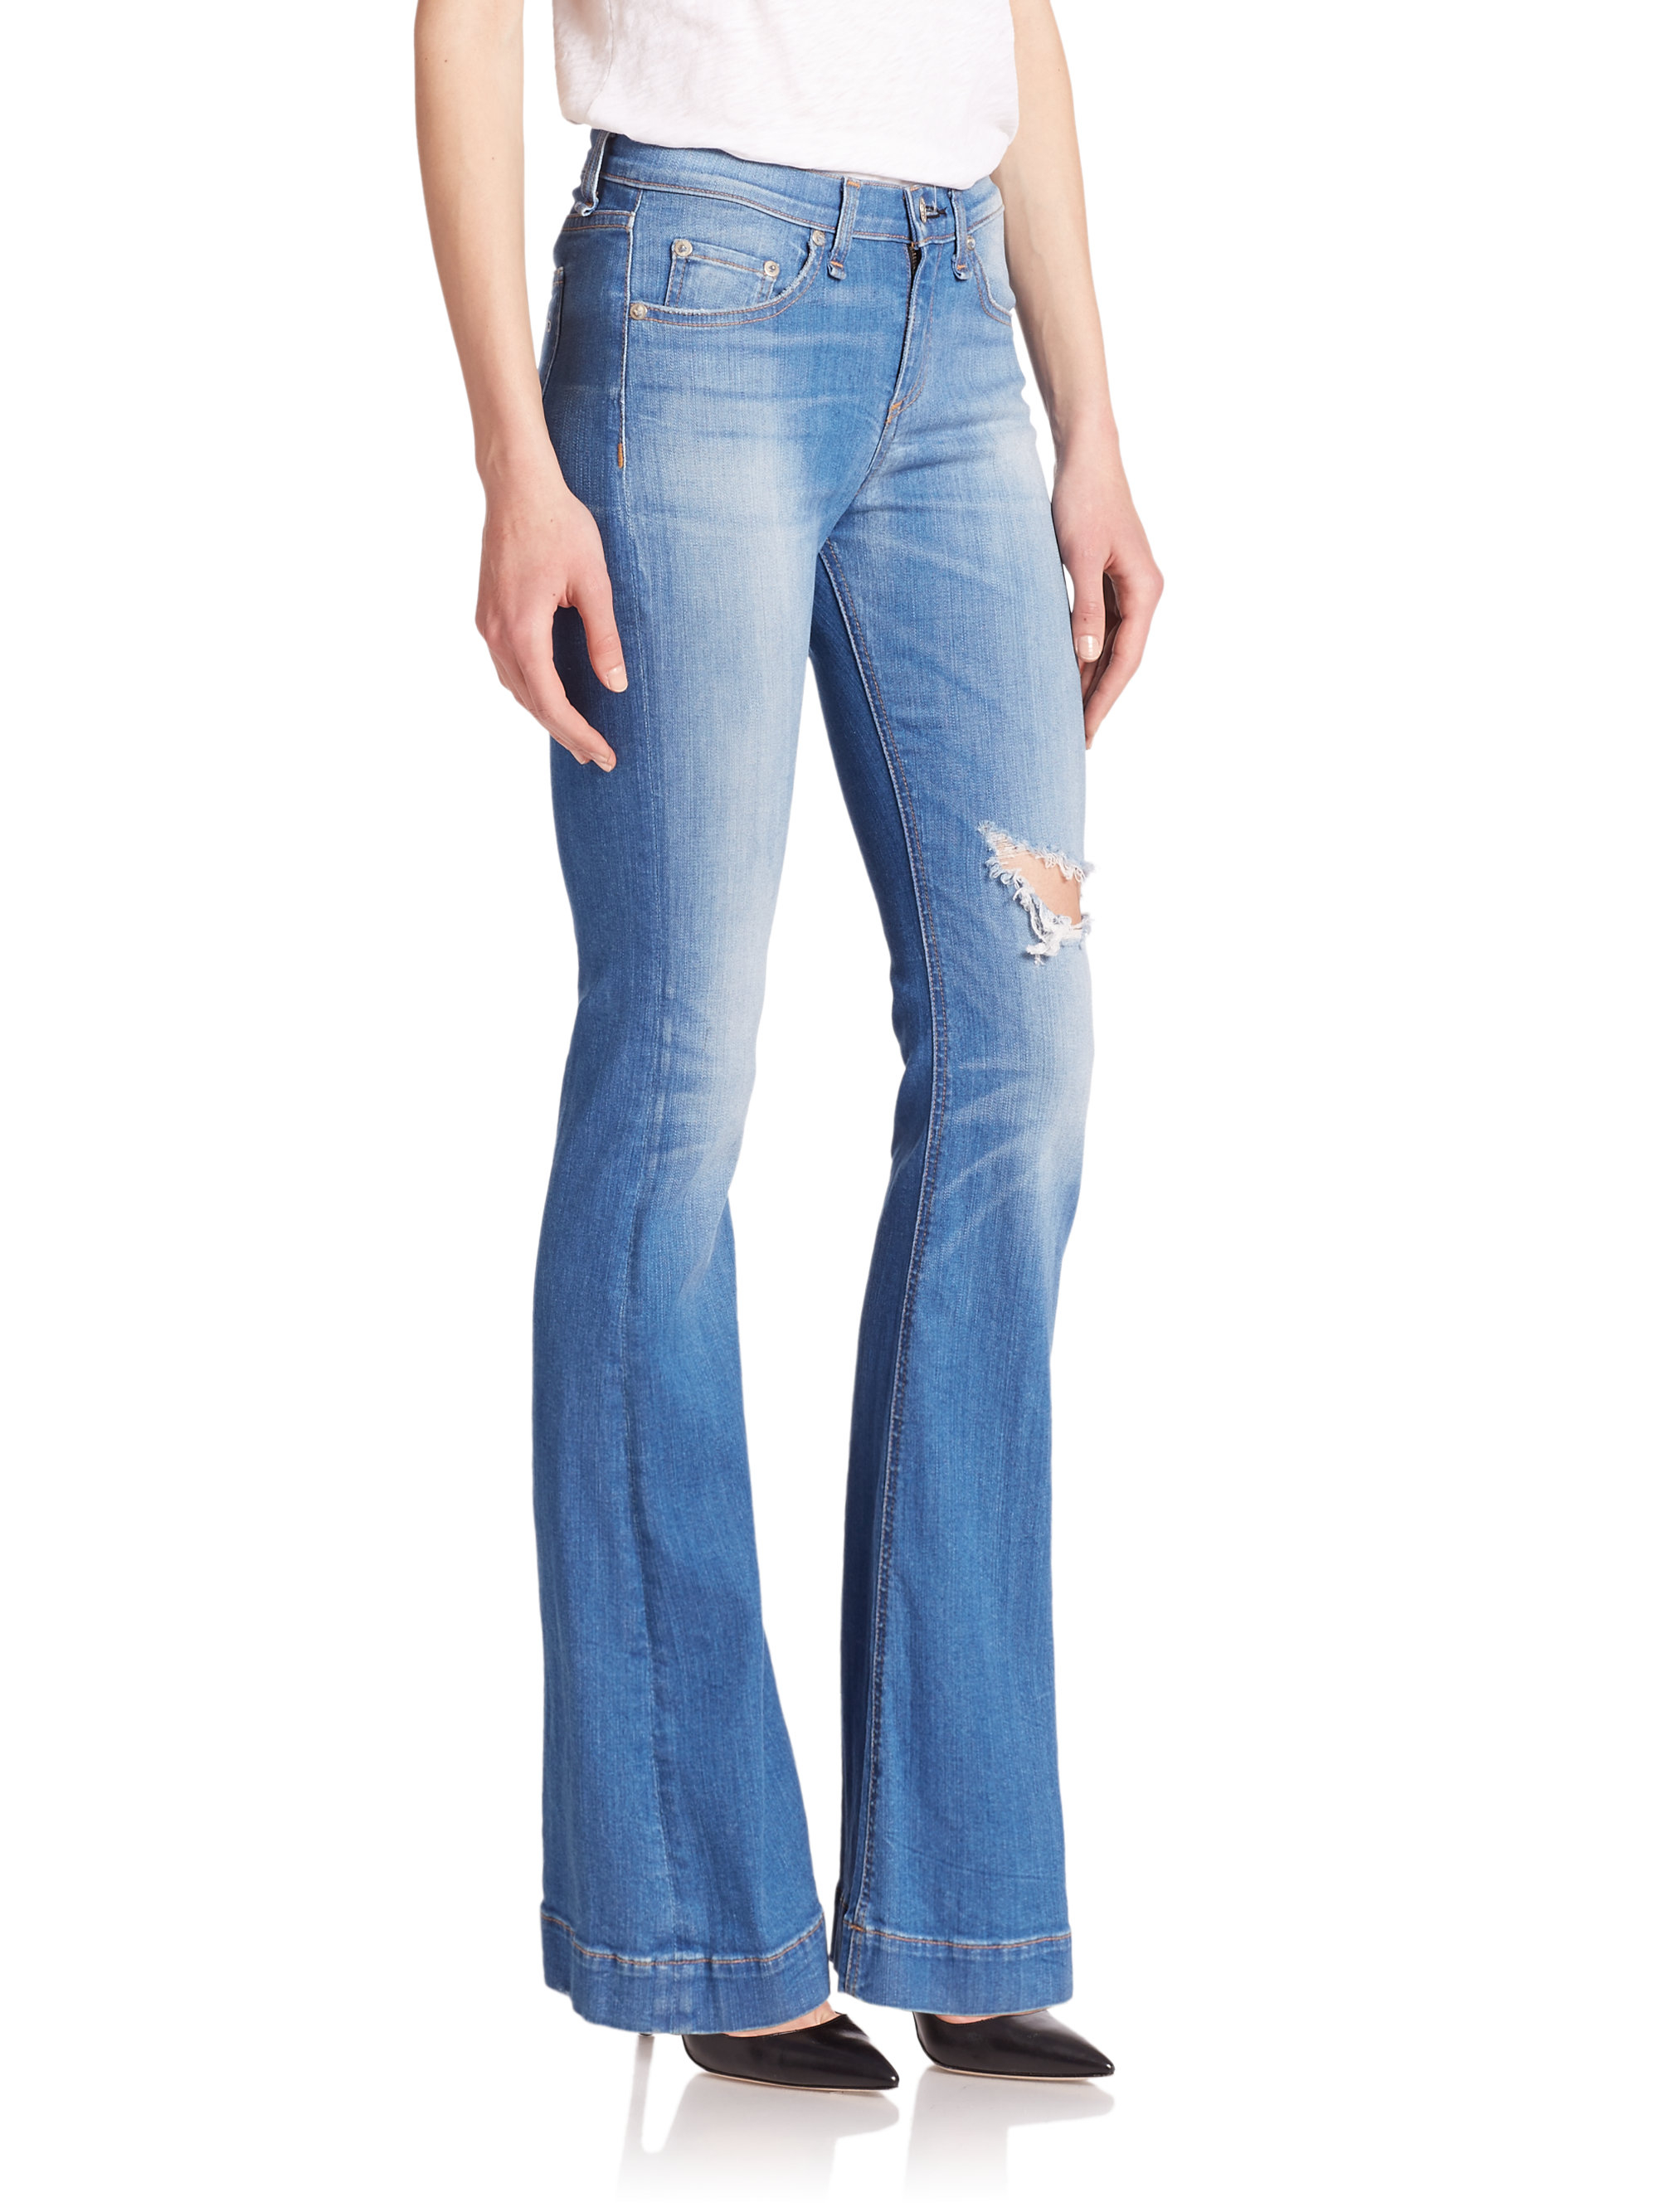 Lyst - Rag & Bone The High-rise Distressed Flare Jeans in Blue